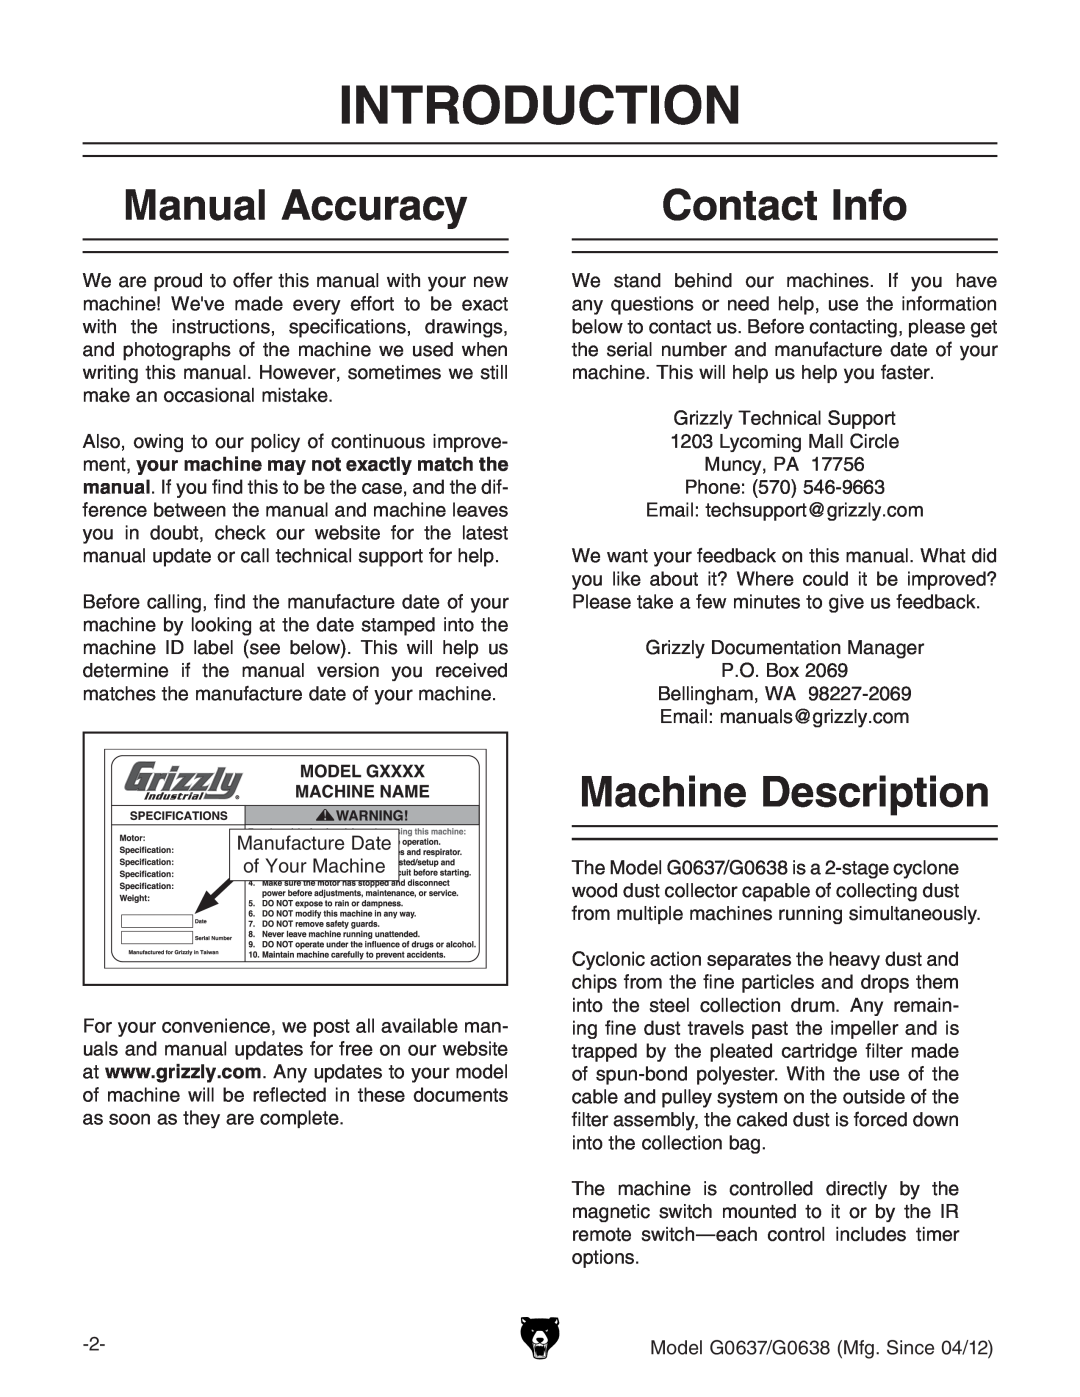 Grizzly G0637 owner manual Introduction, Manual Accuracy, Contact Info, Machine Description, dNdjgBVX^cZ 